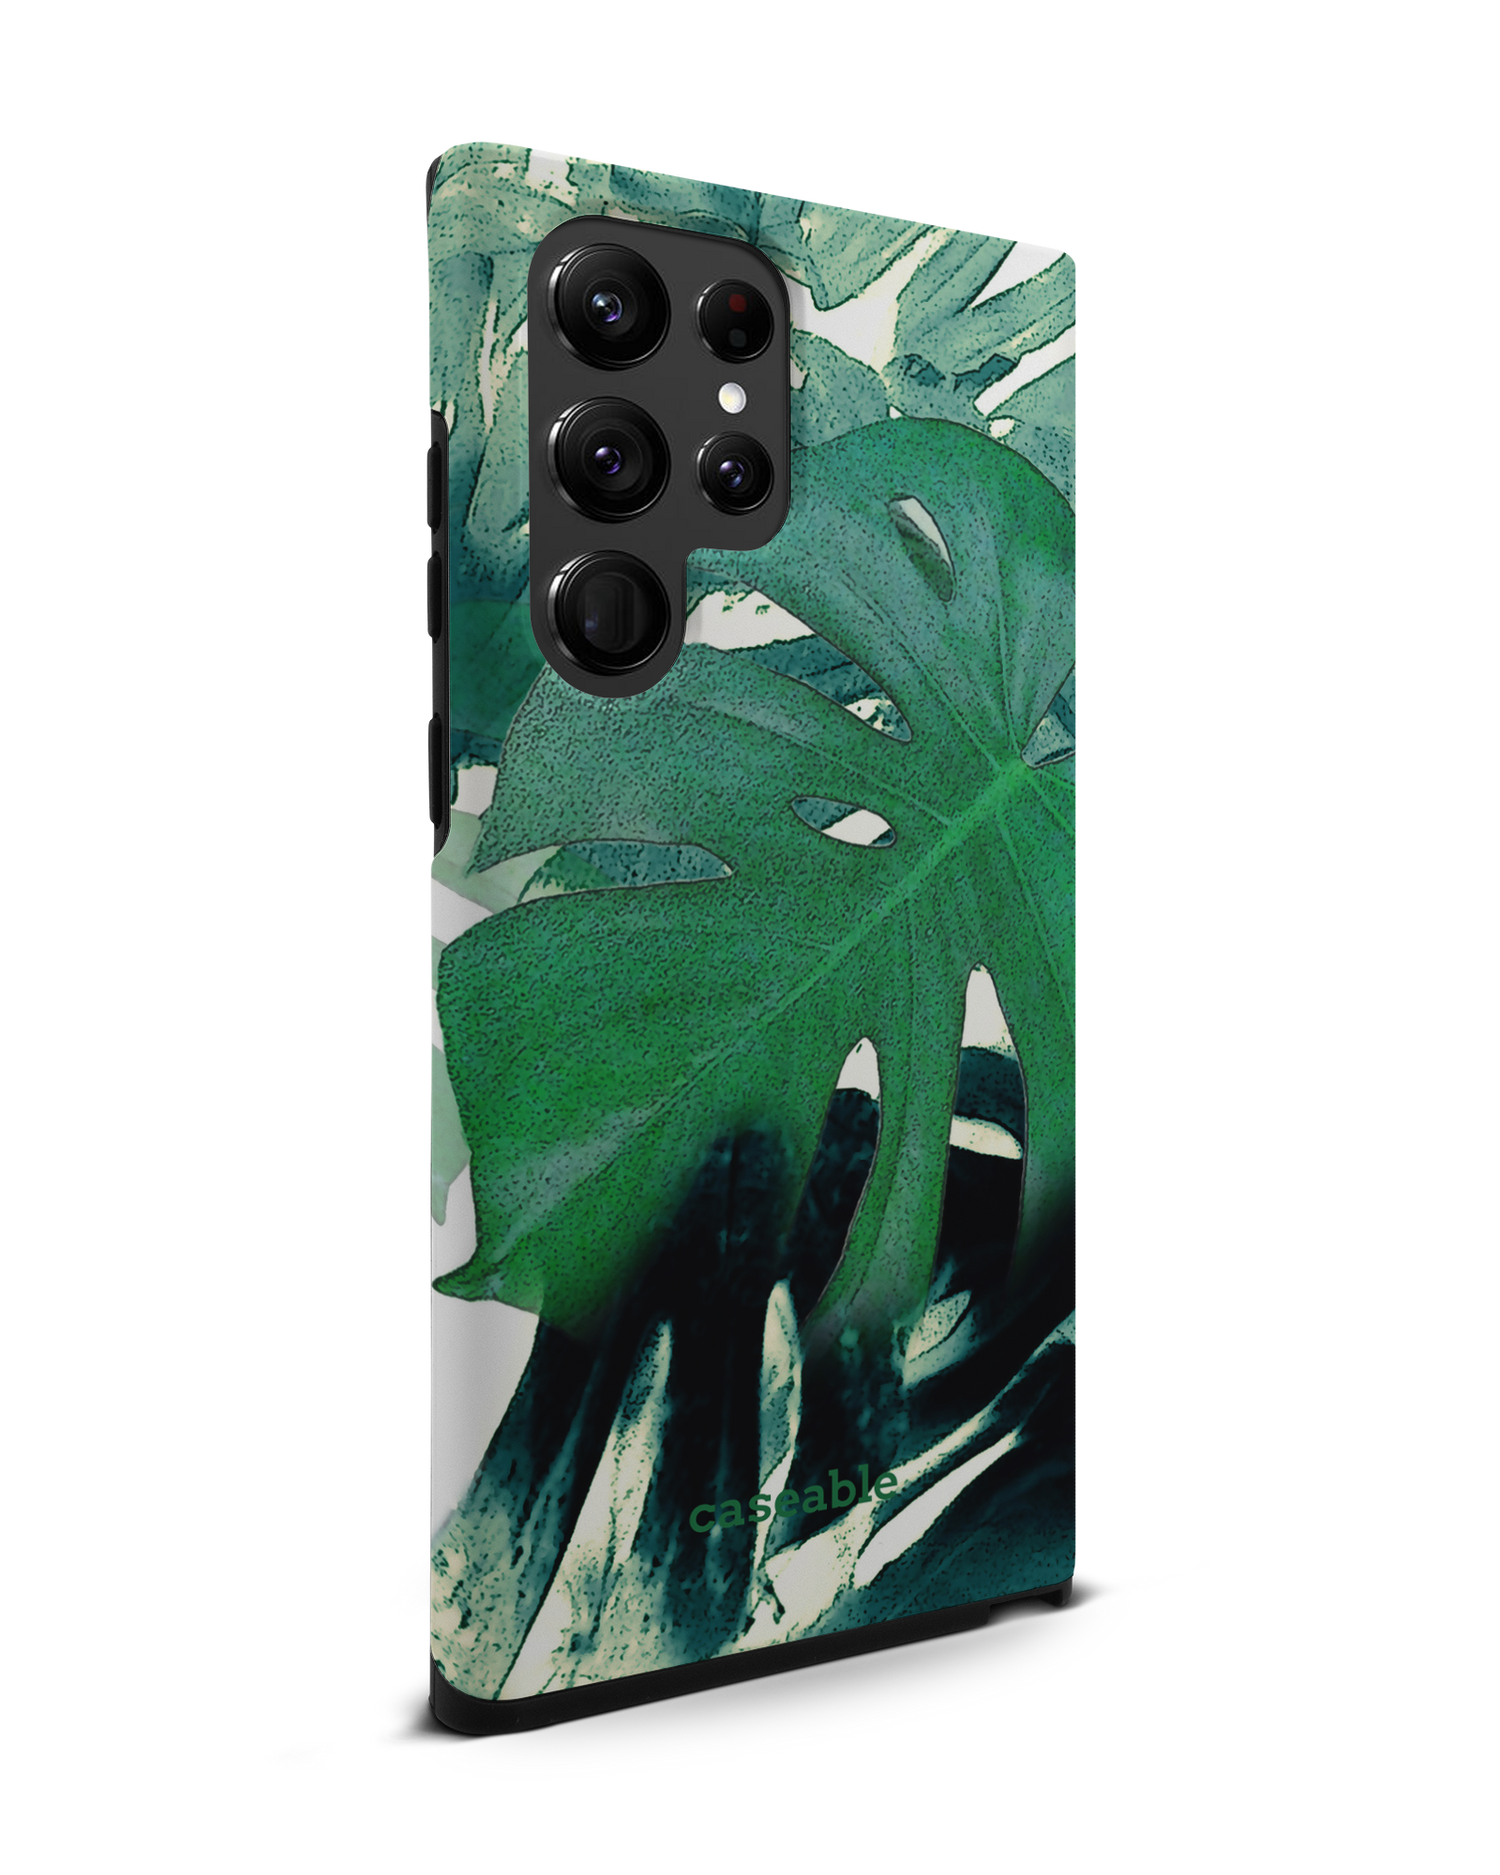 Saturated Plants Premium Phone Case Samsung Galaxy S22 Ultra 5G: View from the left side